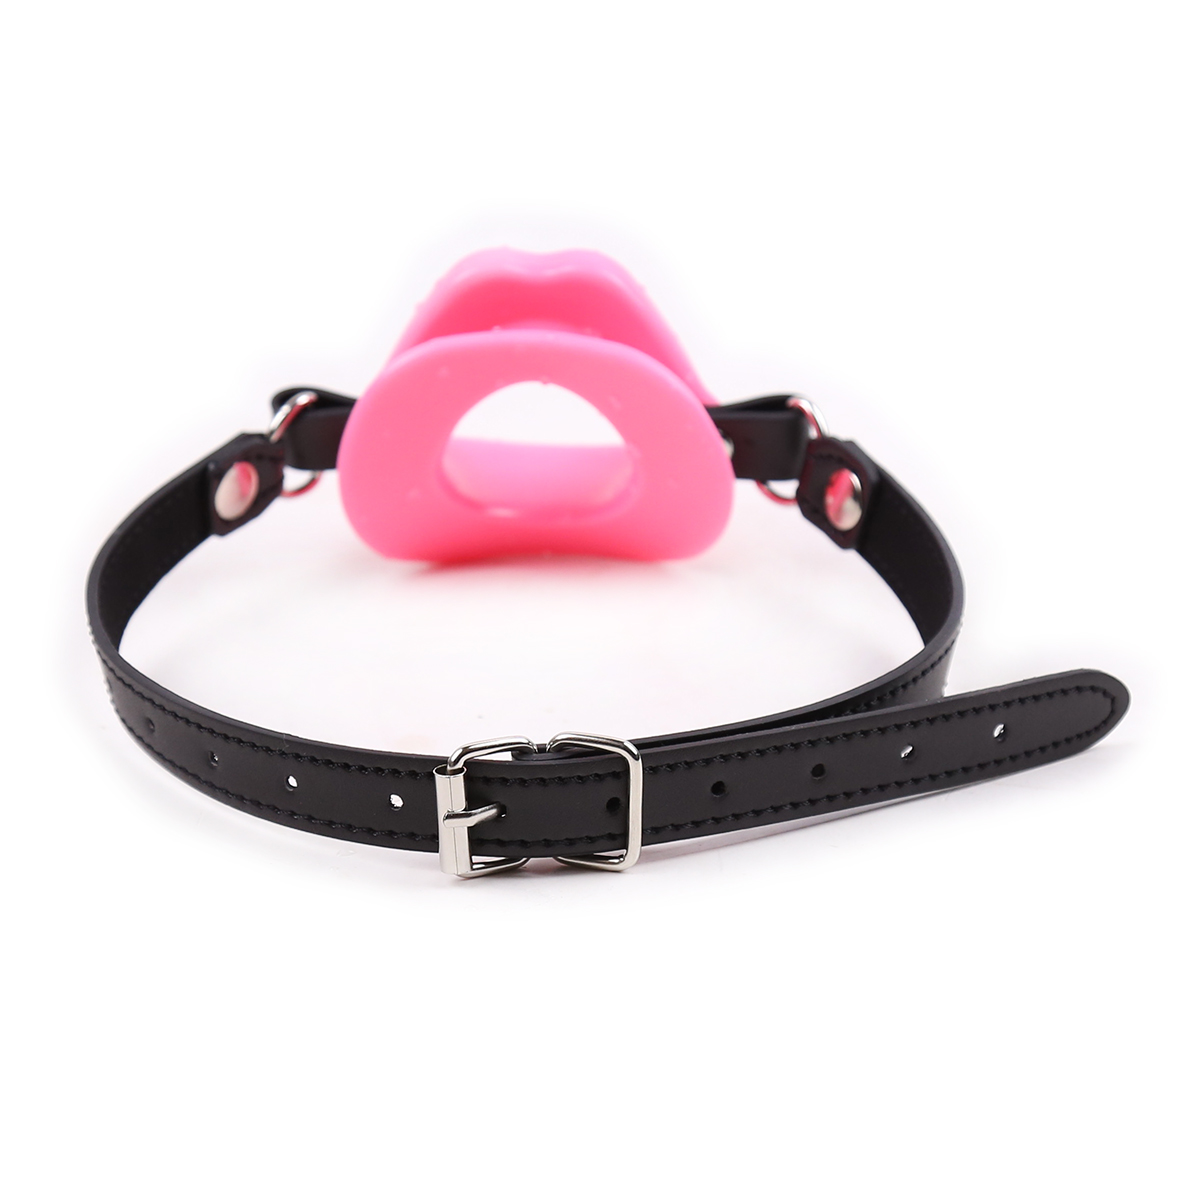 Mouth-Gag-Pink-Mouth-OPR-321033-1